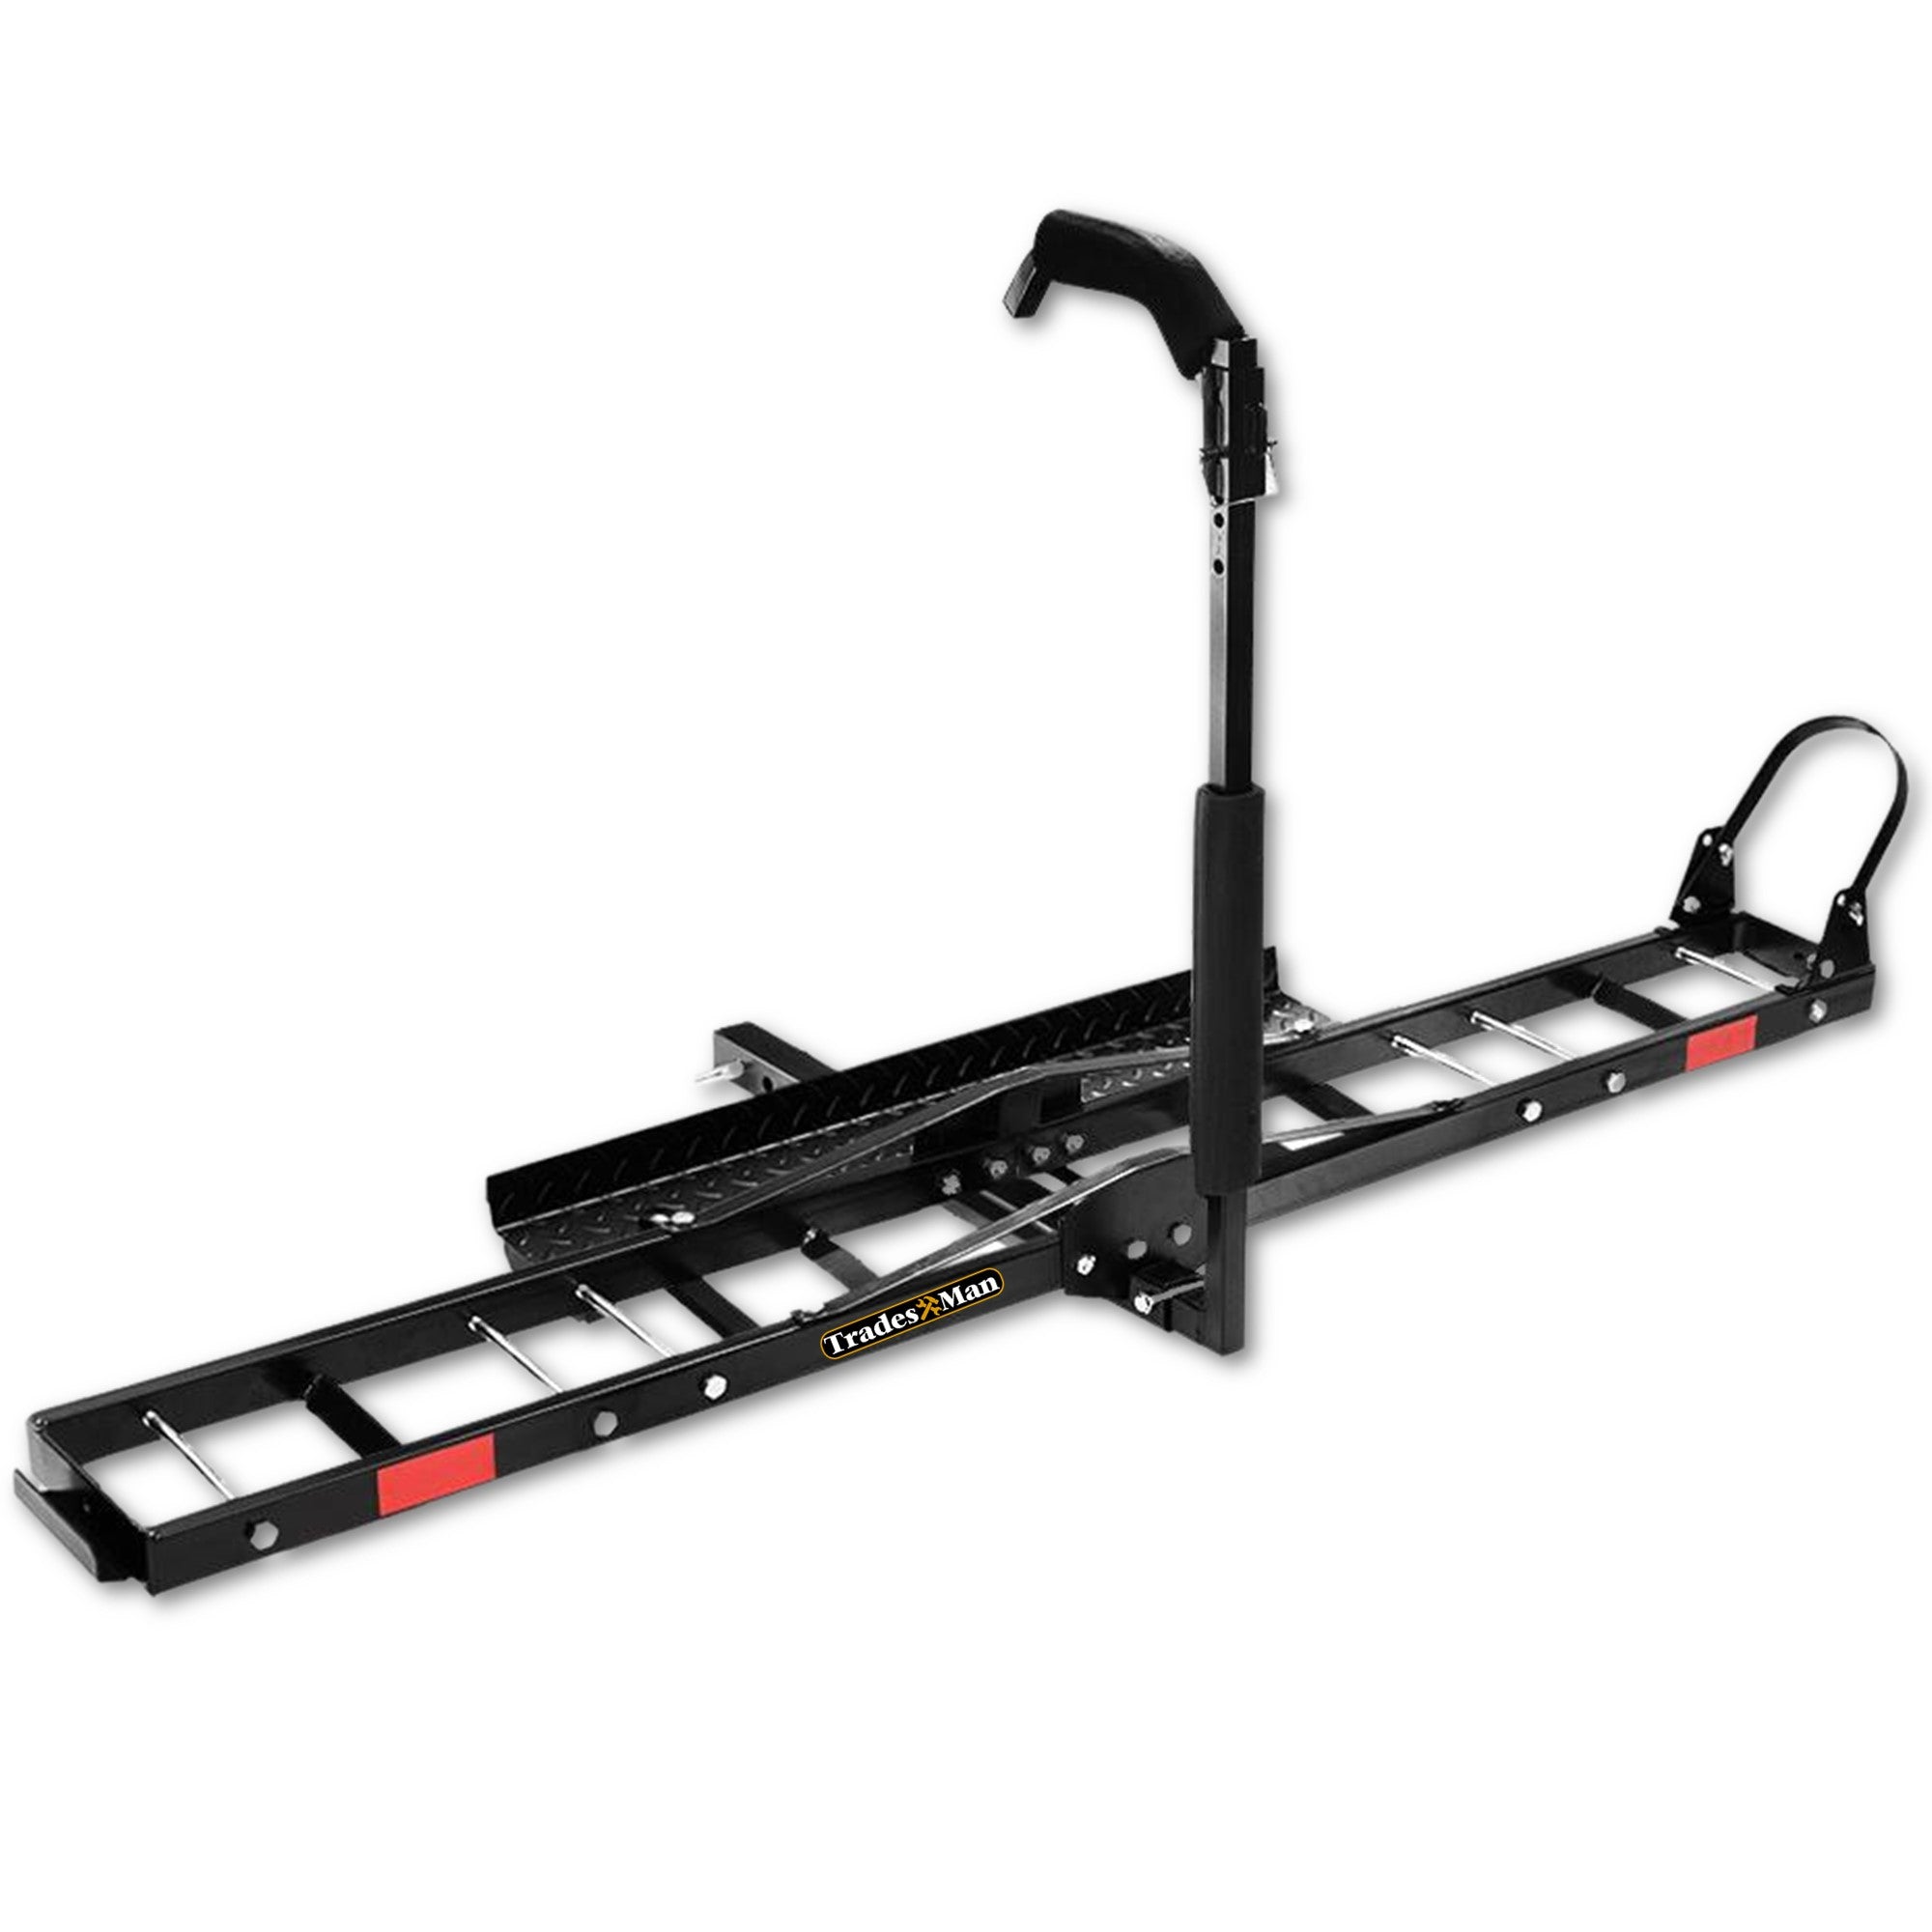 Motorcycle Carrier 227kg Max Load Heavy Duty